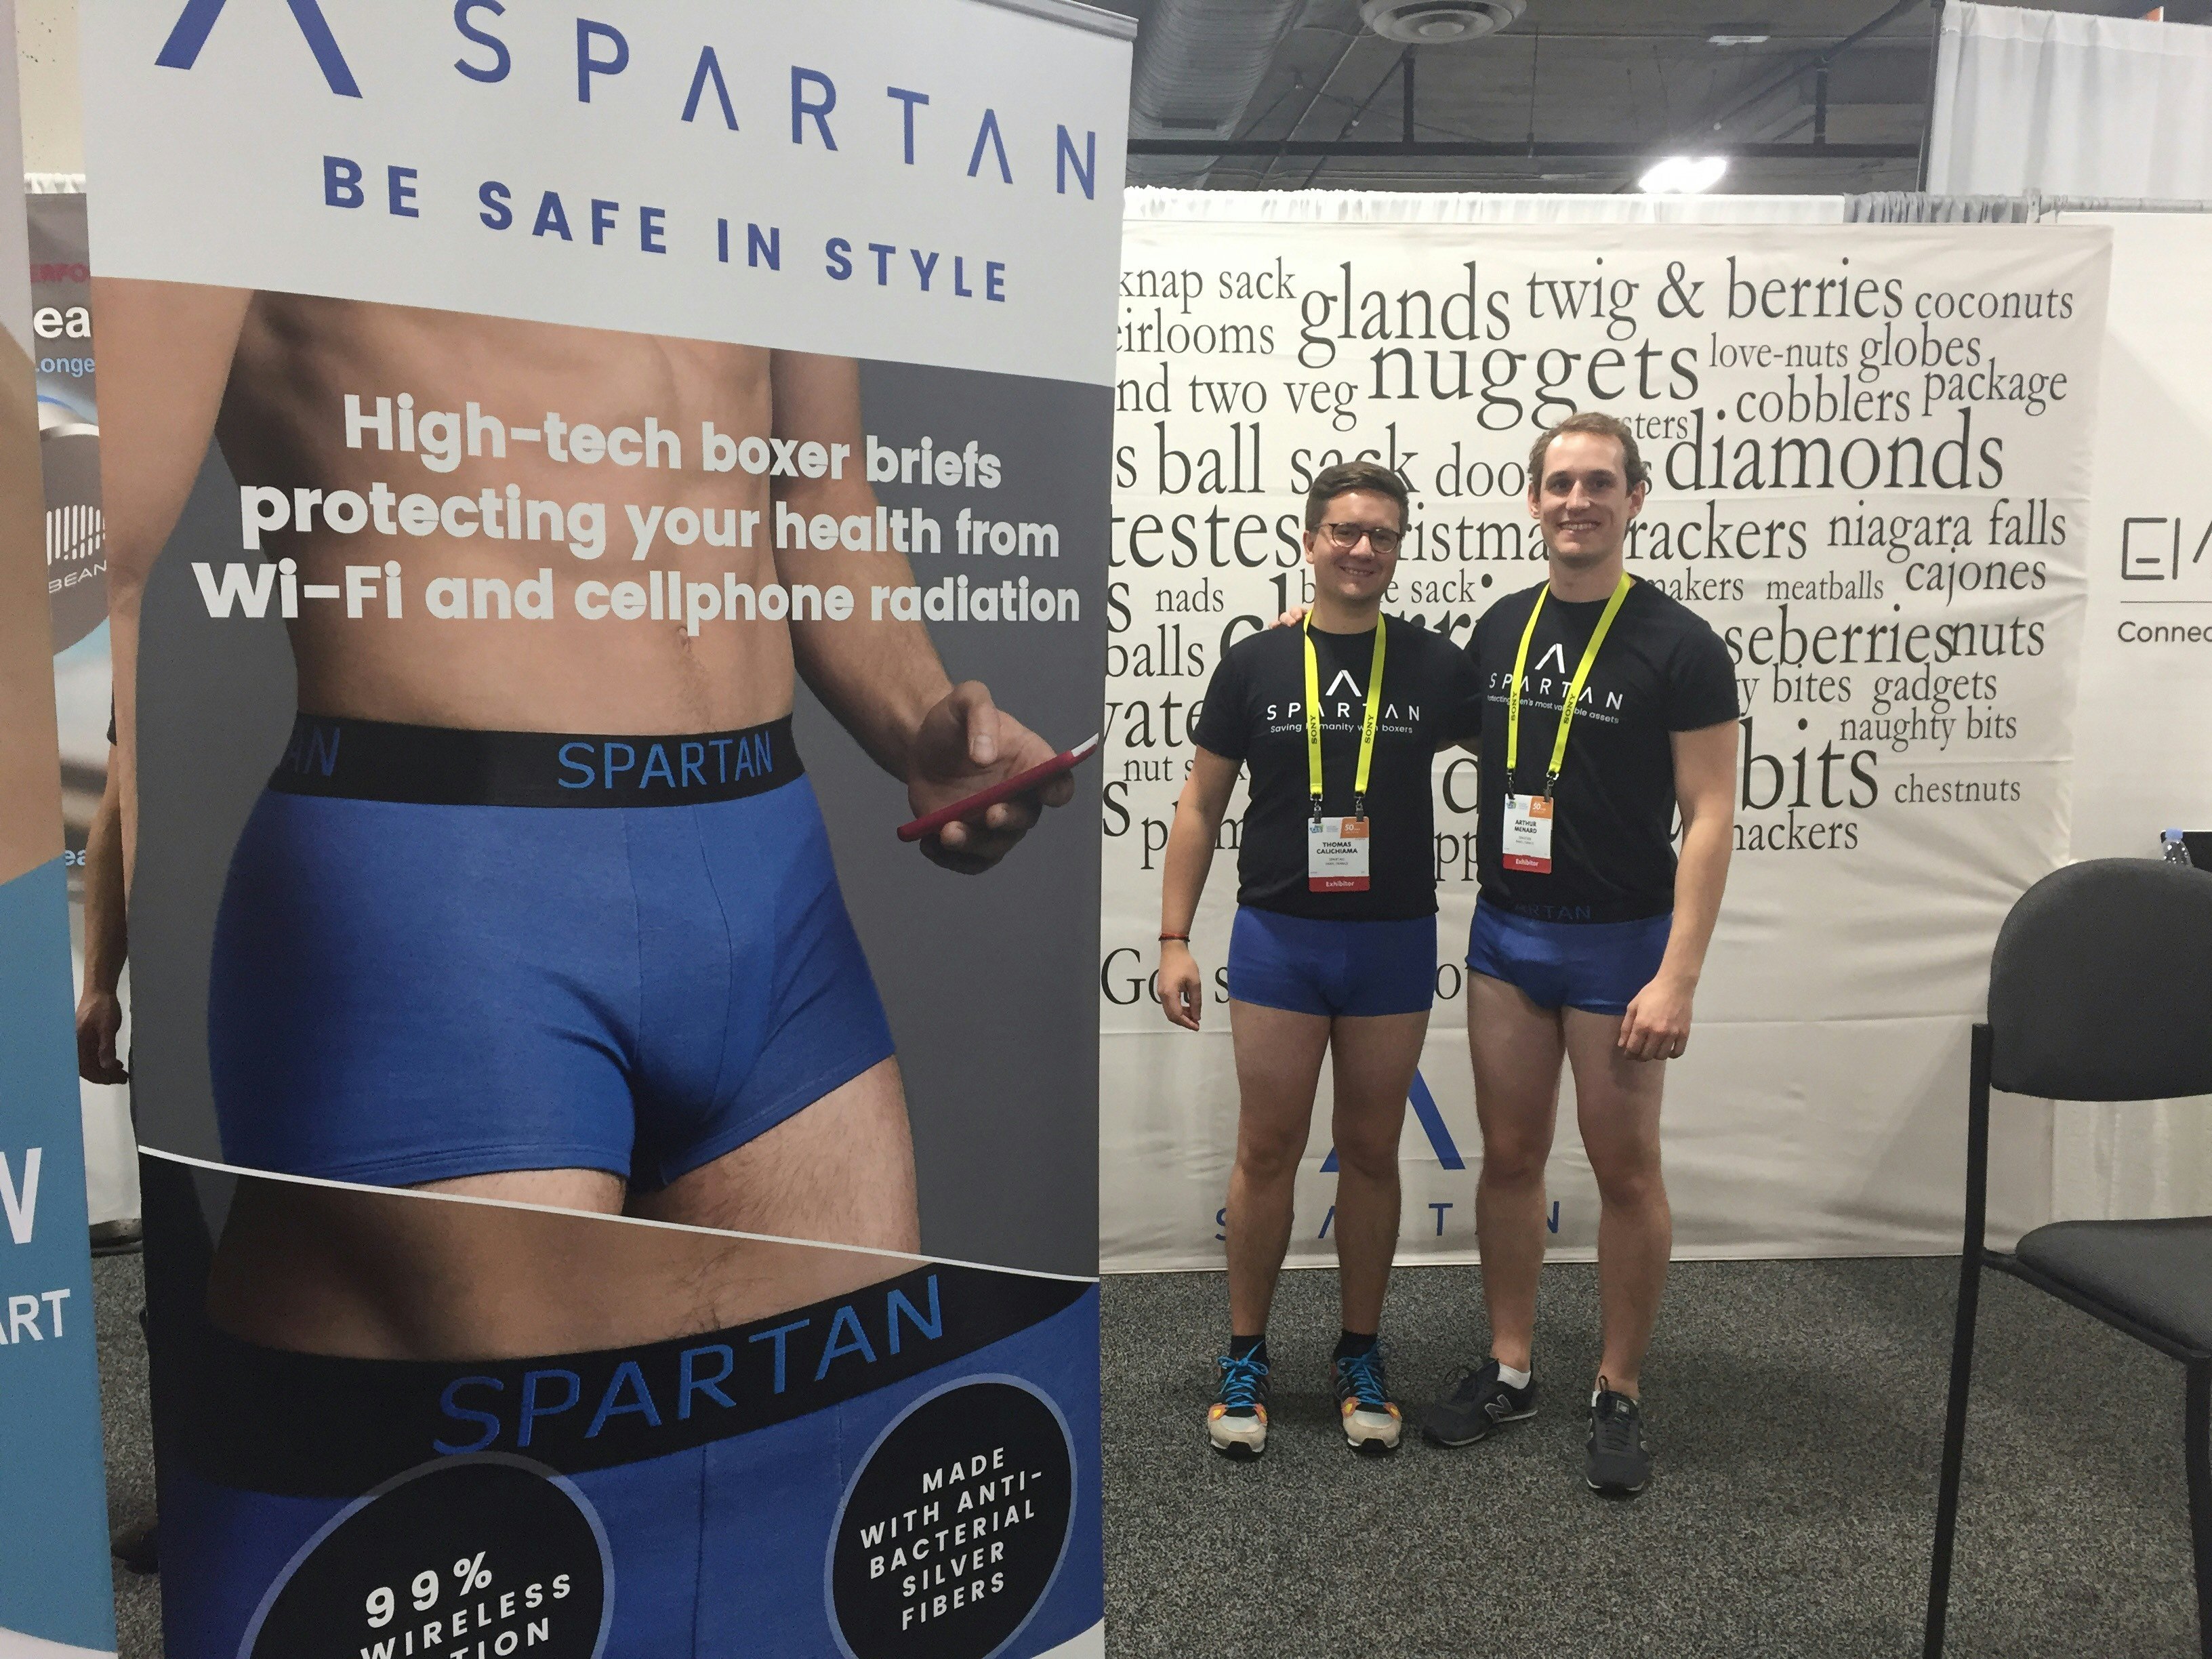 SPARTAN - Stylish High-Tech Boxers for your Health